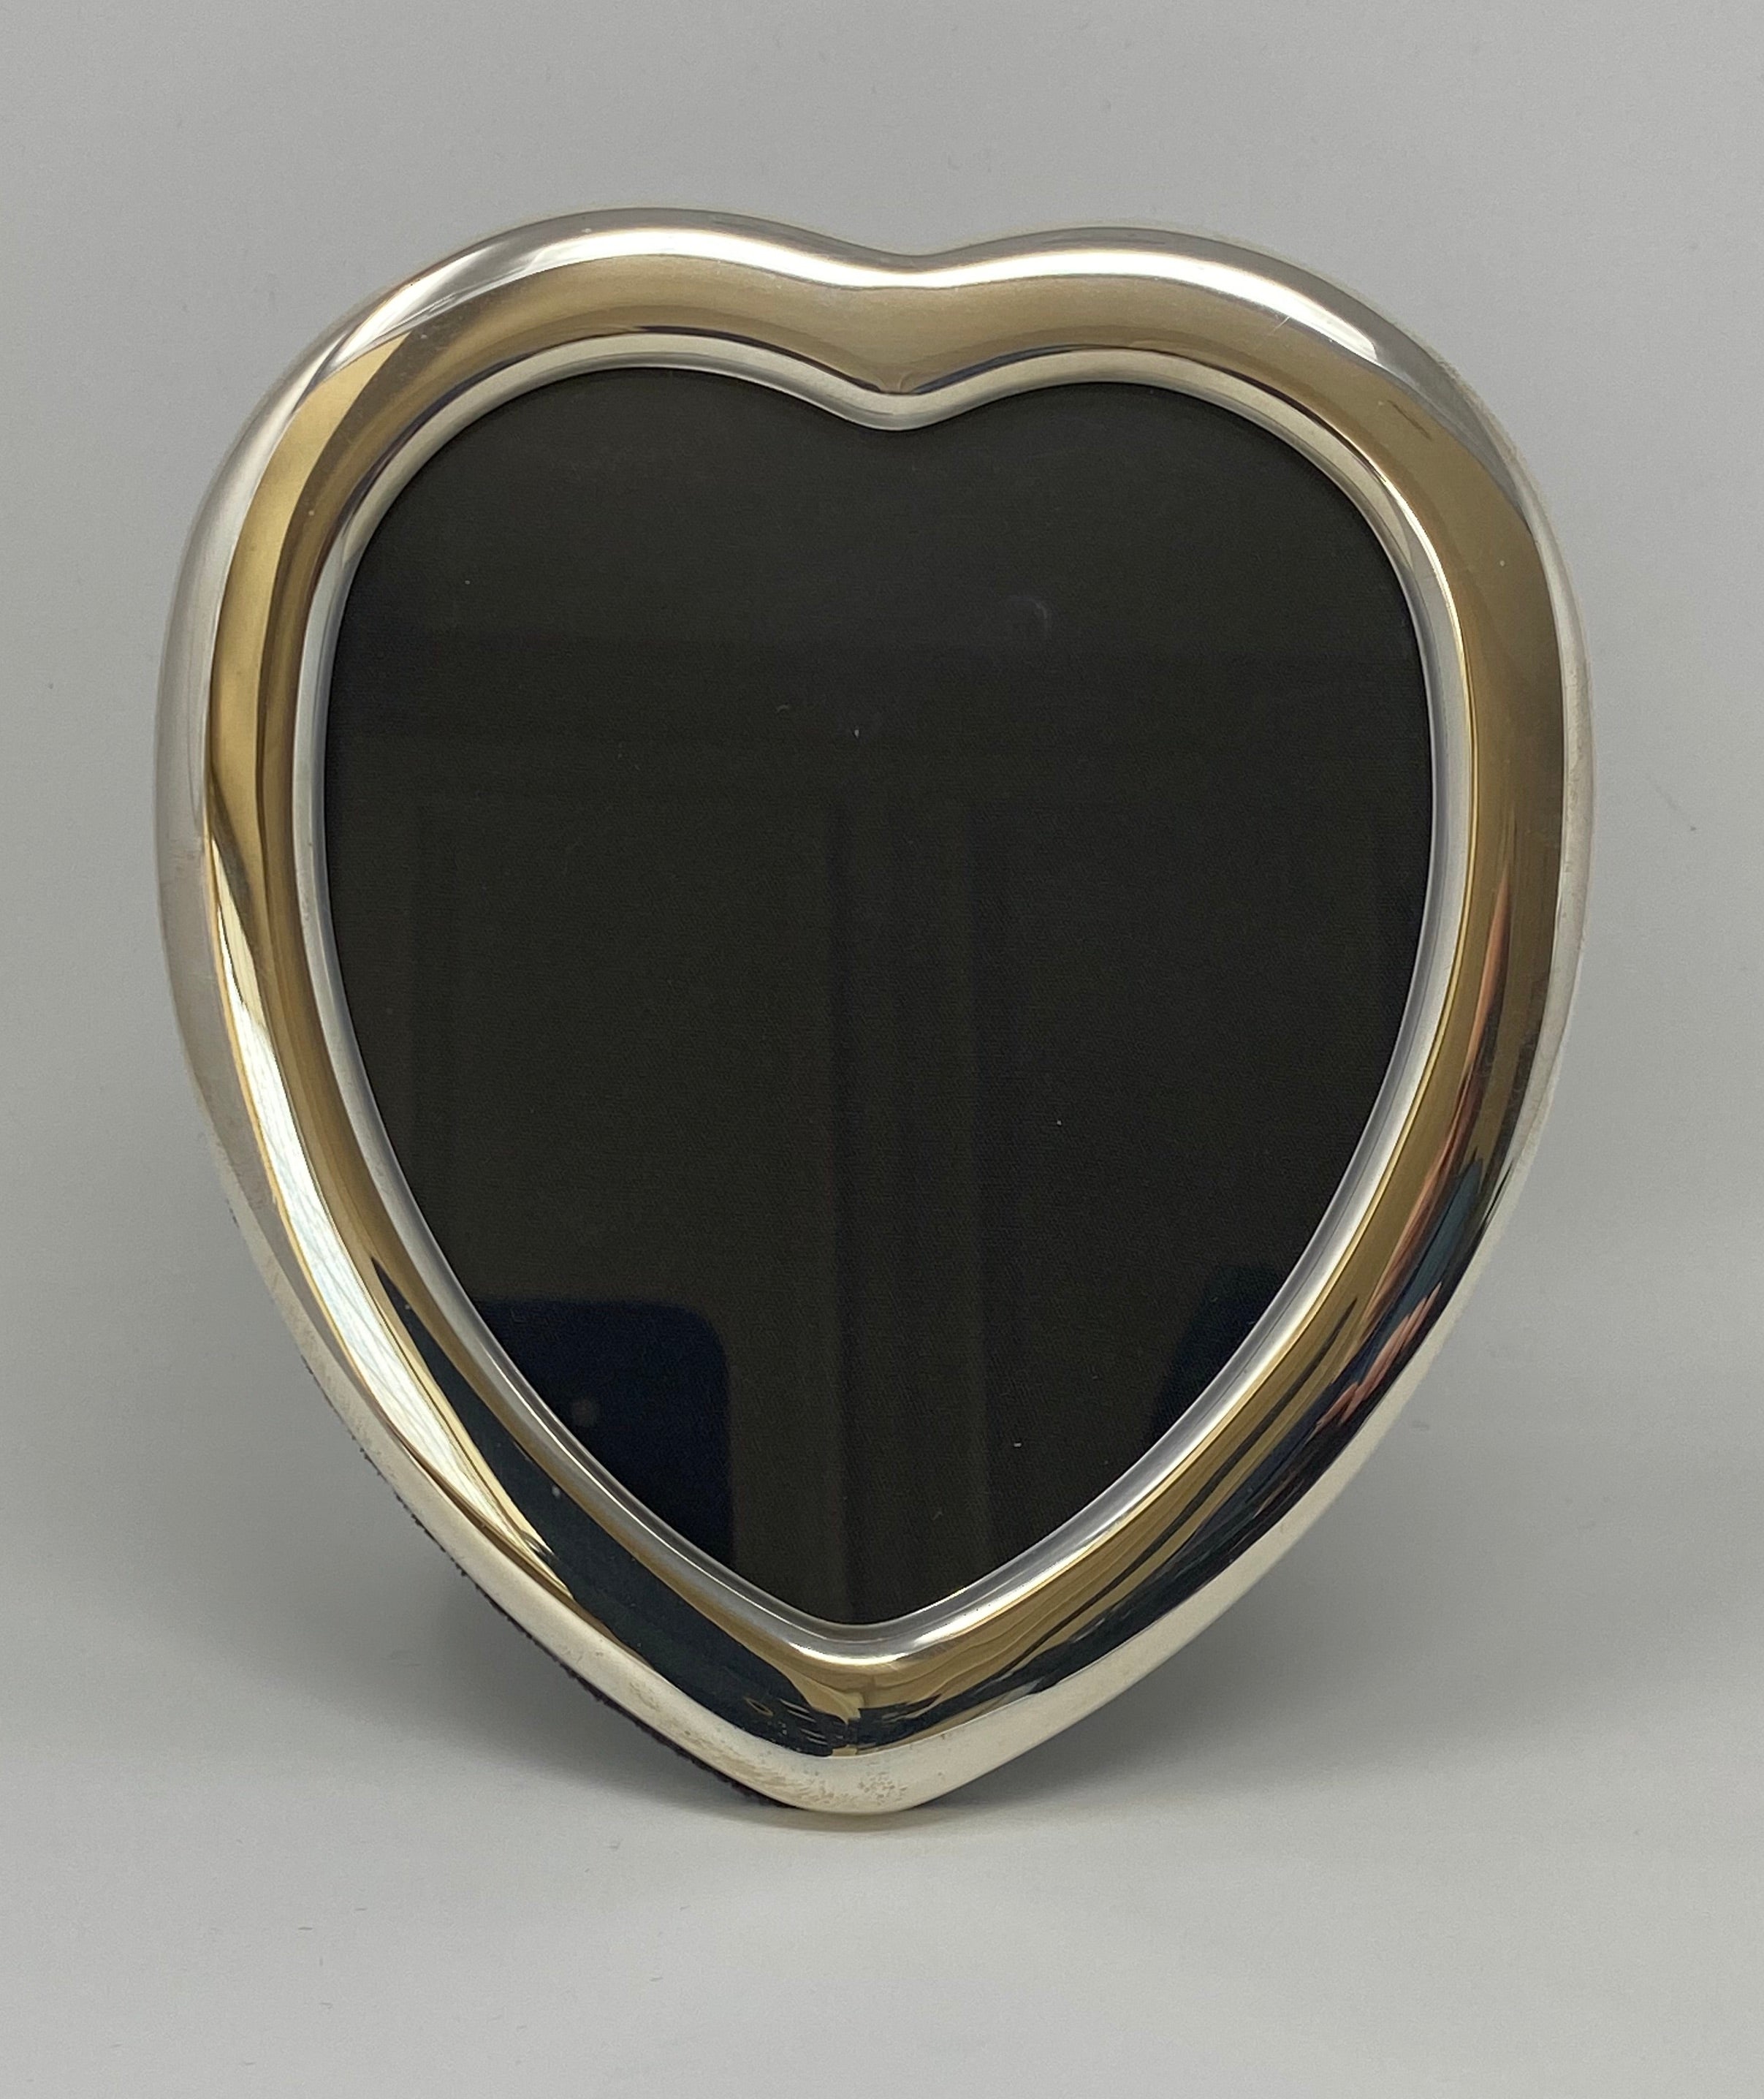 Silver Heart Photo Frame - made by Carrs of Sheffield